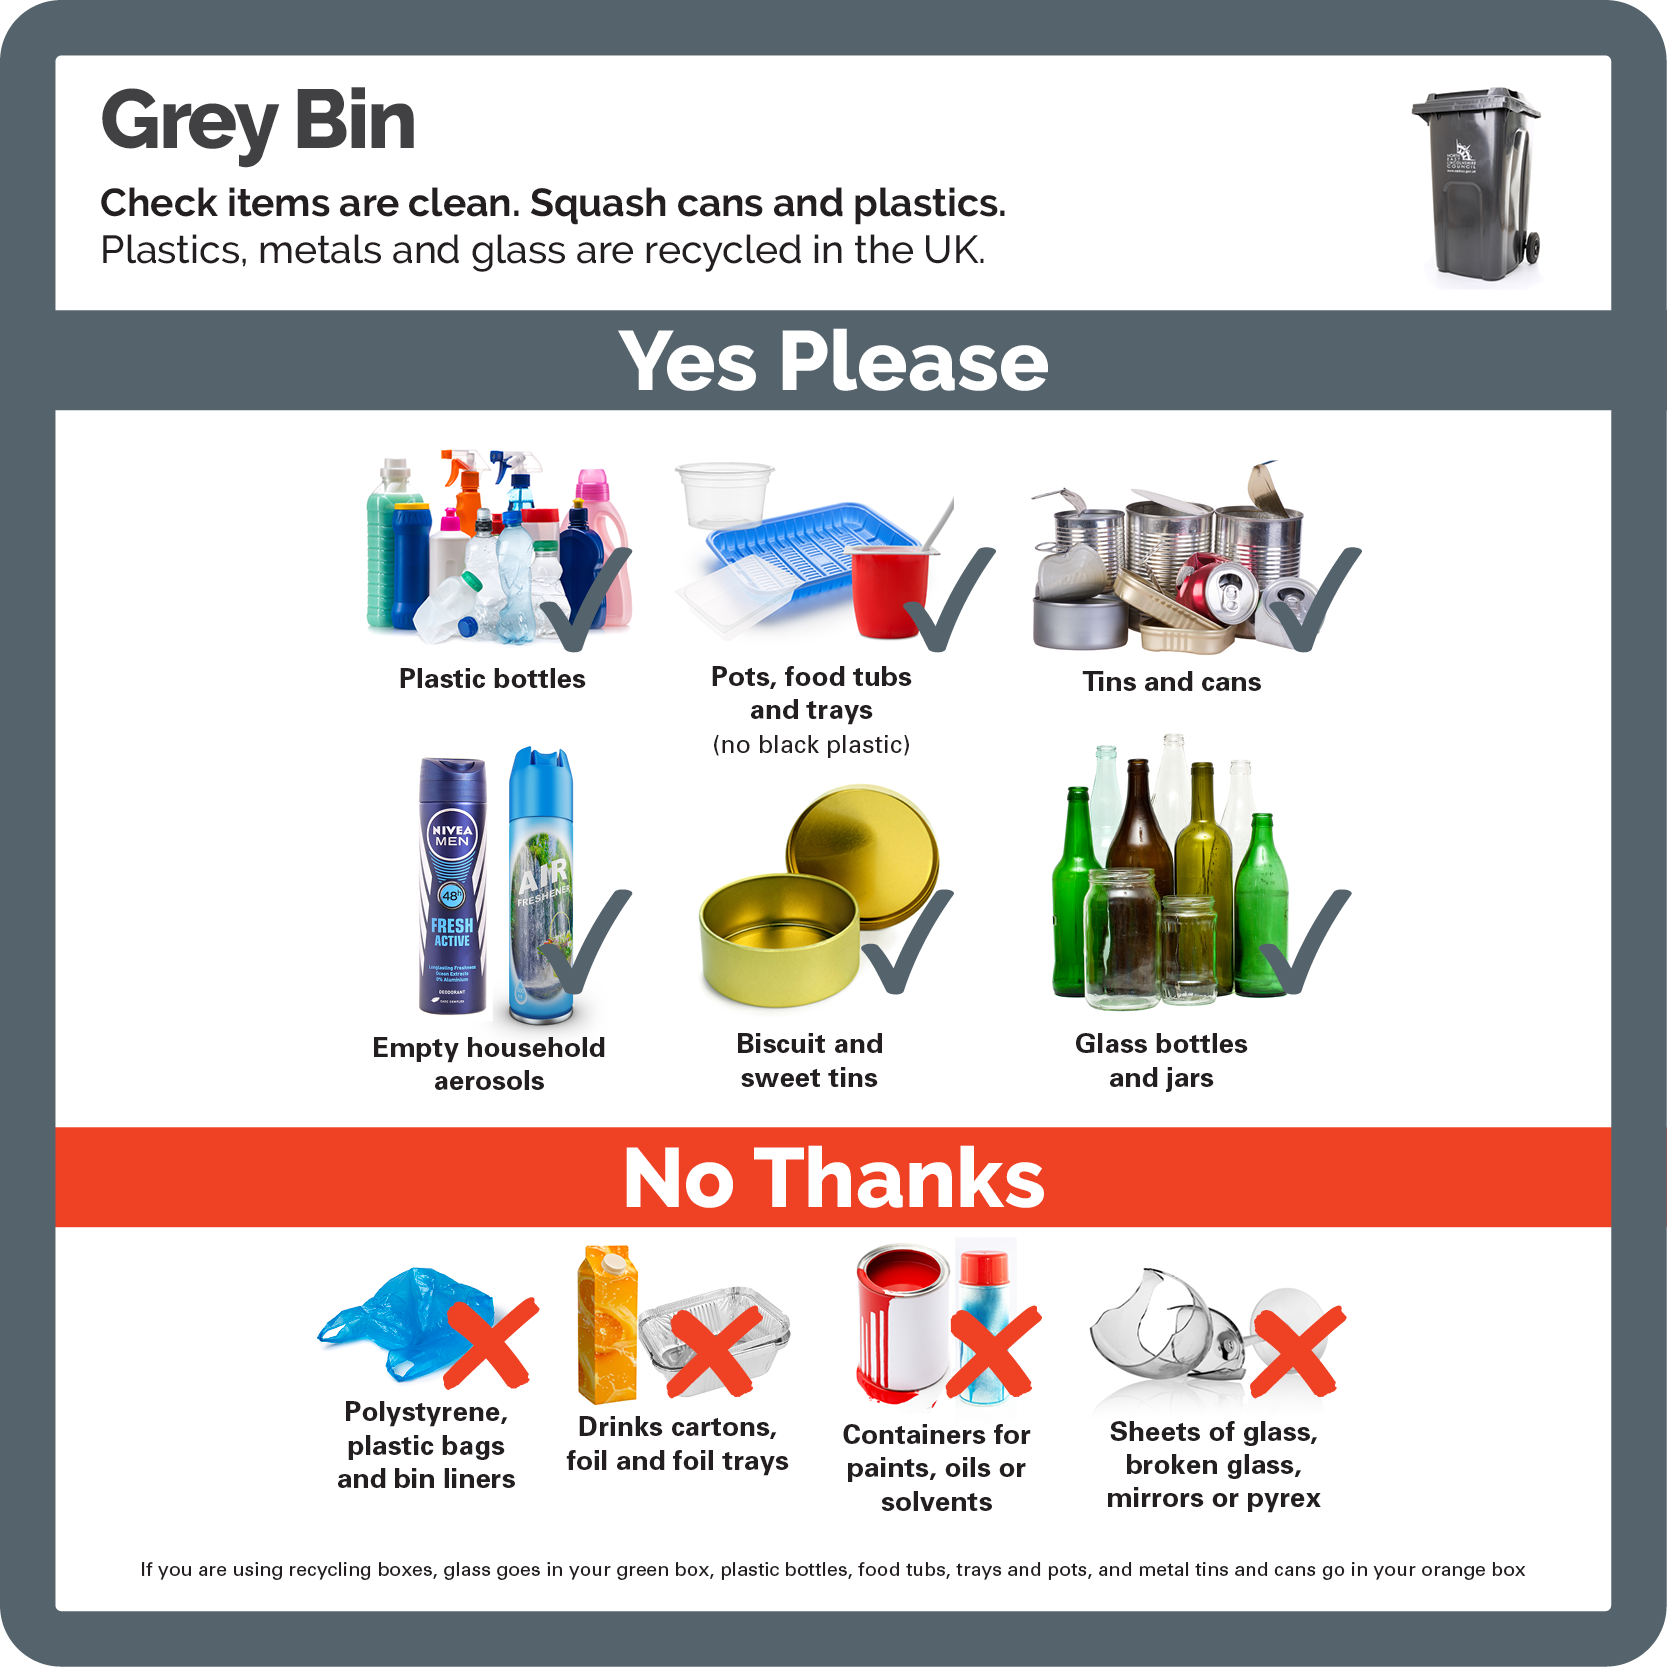 An image showing items that go in the grey bin.